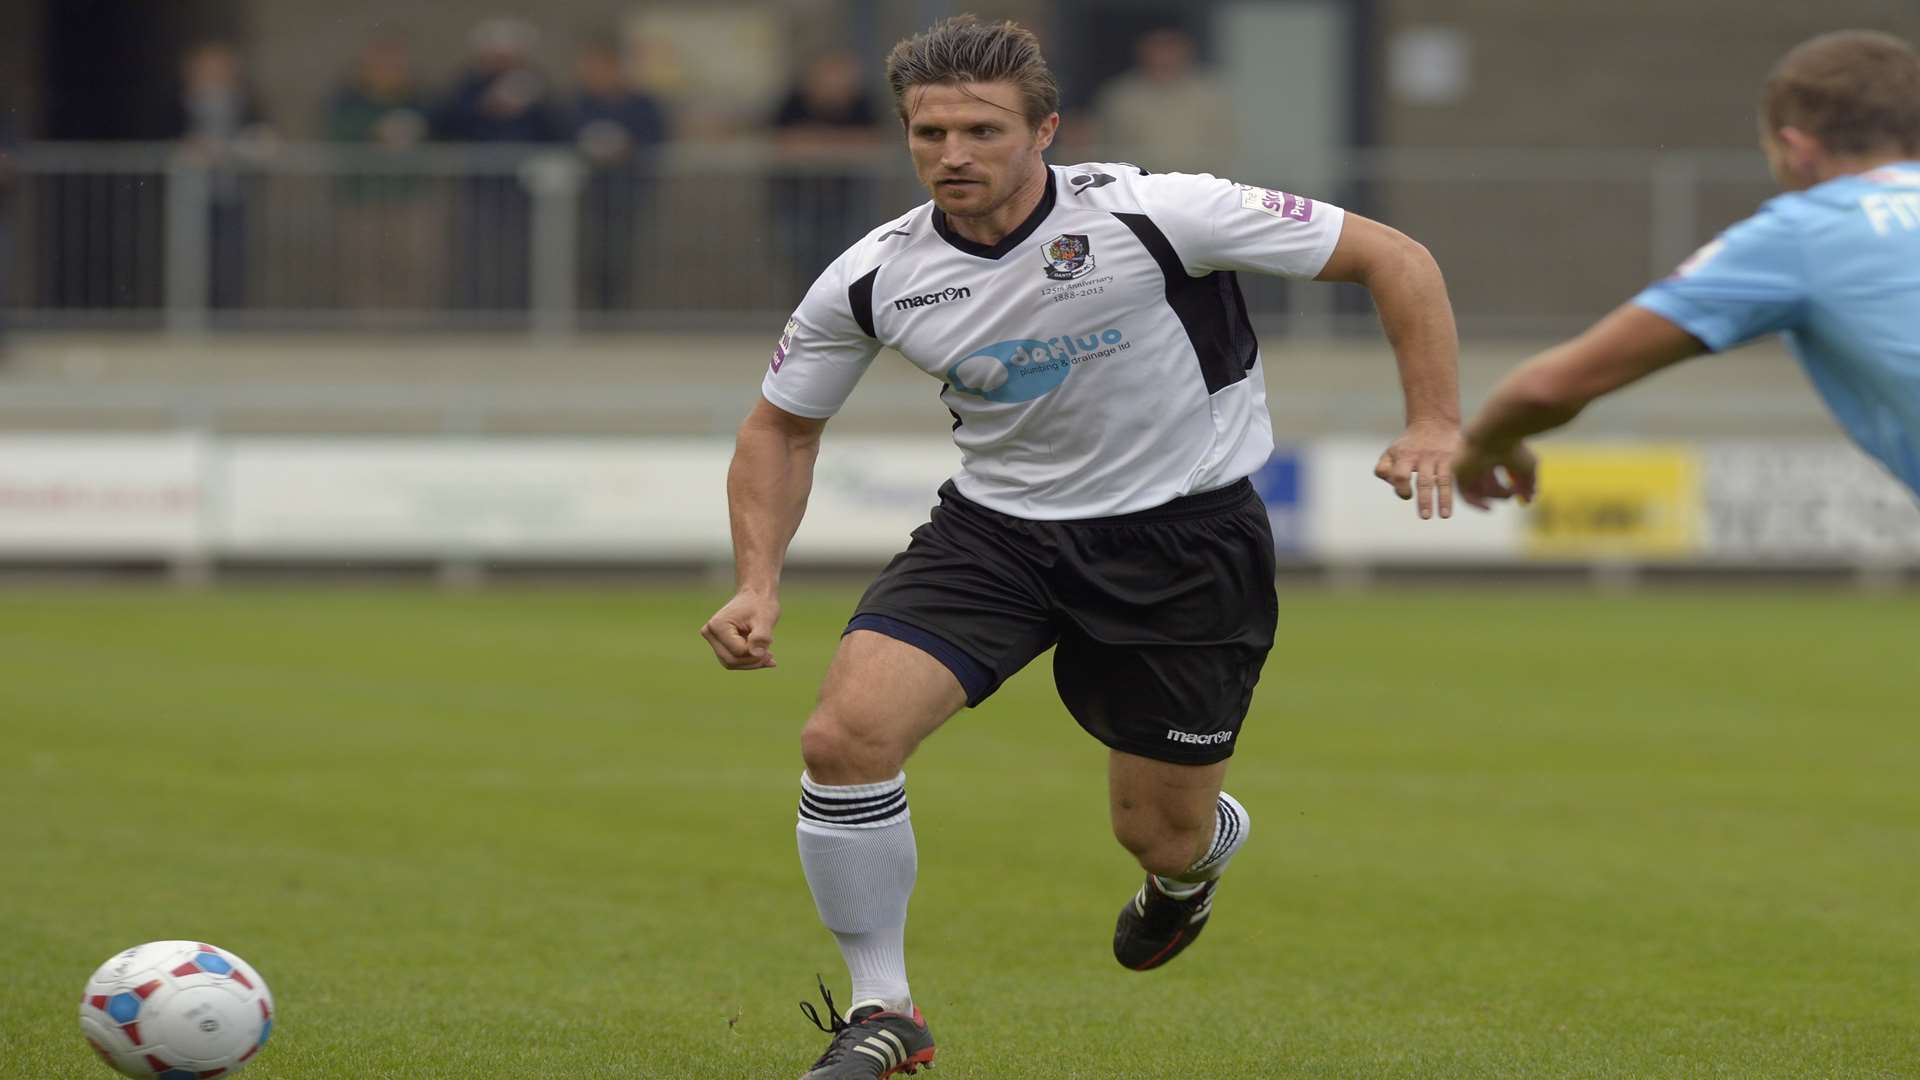 Lee Burns has played more than 250 games for Dartford Picture: Andy Payton